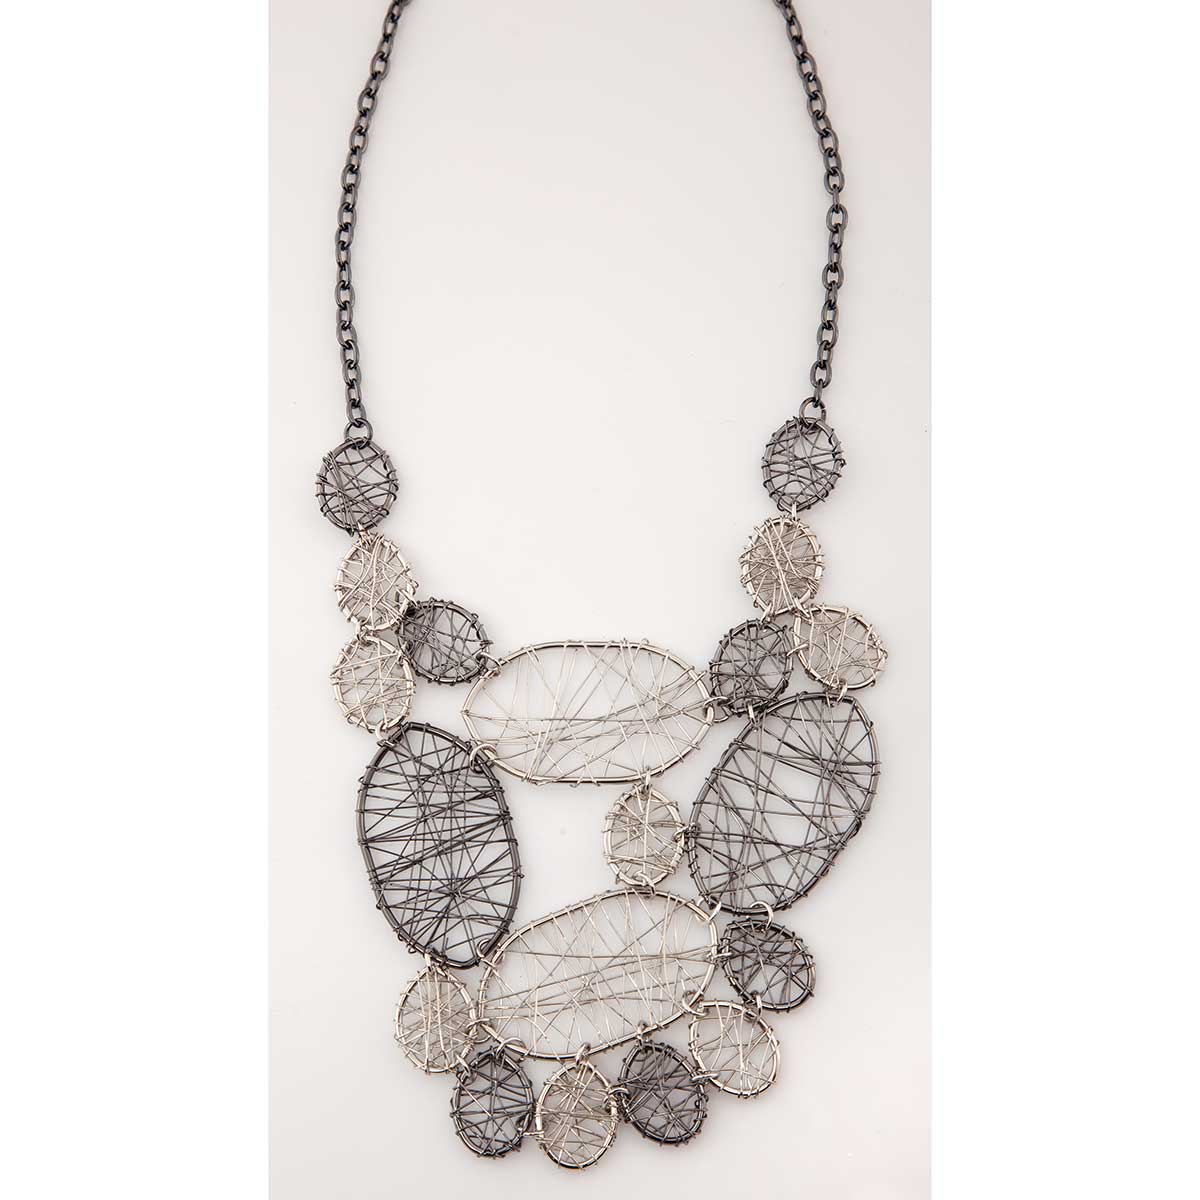 Pewter and Silver Oval Shapes Bib Necklace 70sp